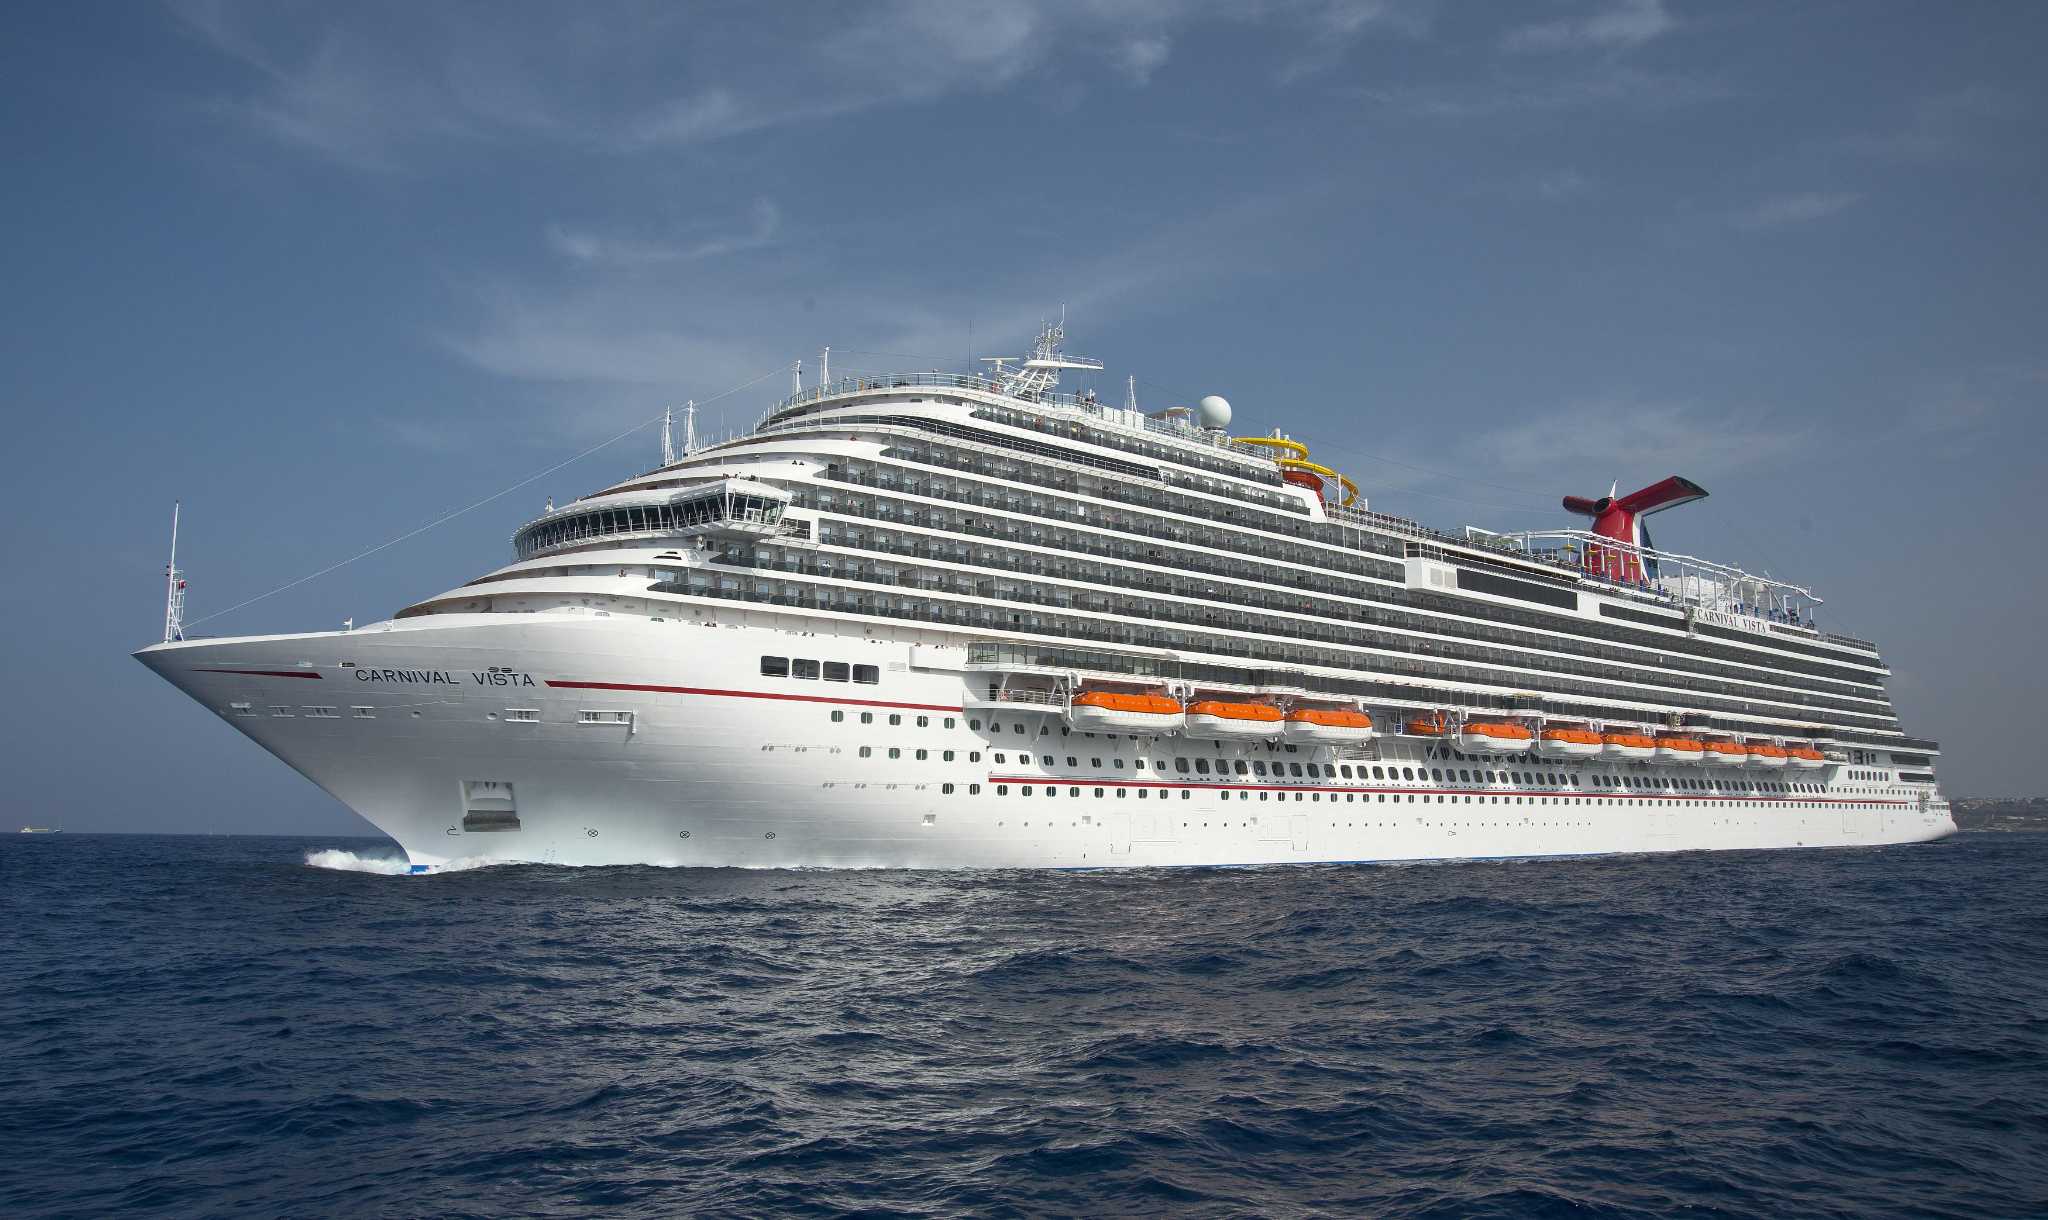 The Vista is the largest Carnival ship ever homeported in Galveston